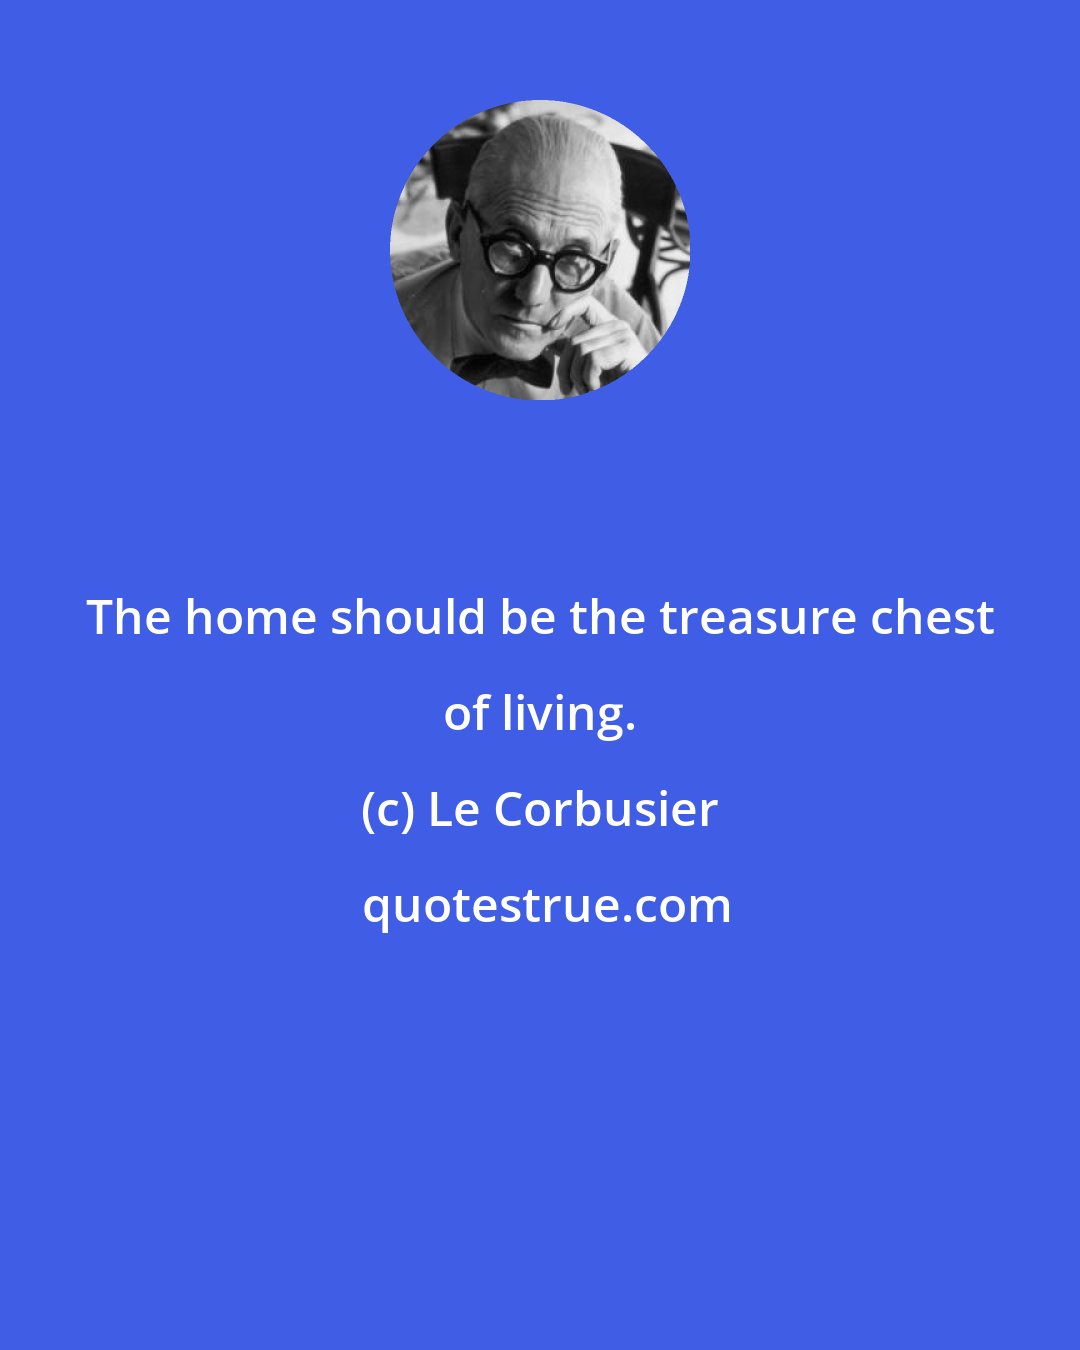 Le Corbusier: The home should be the treasure chest of living.